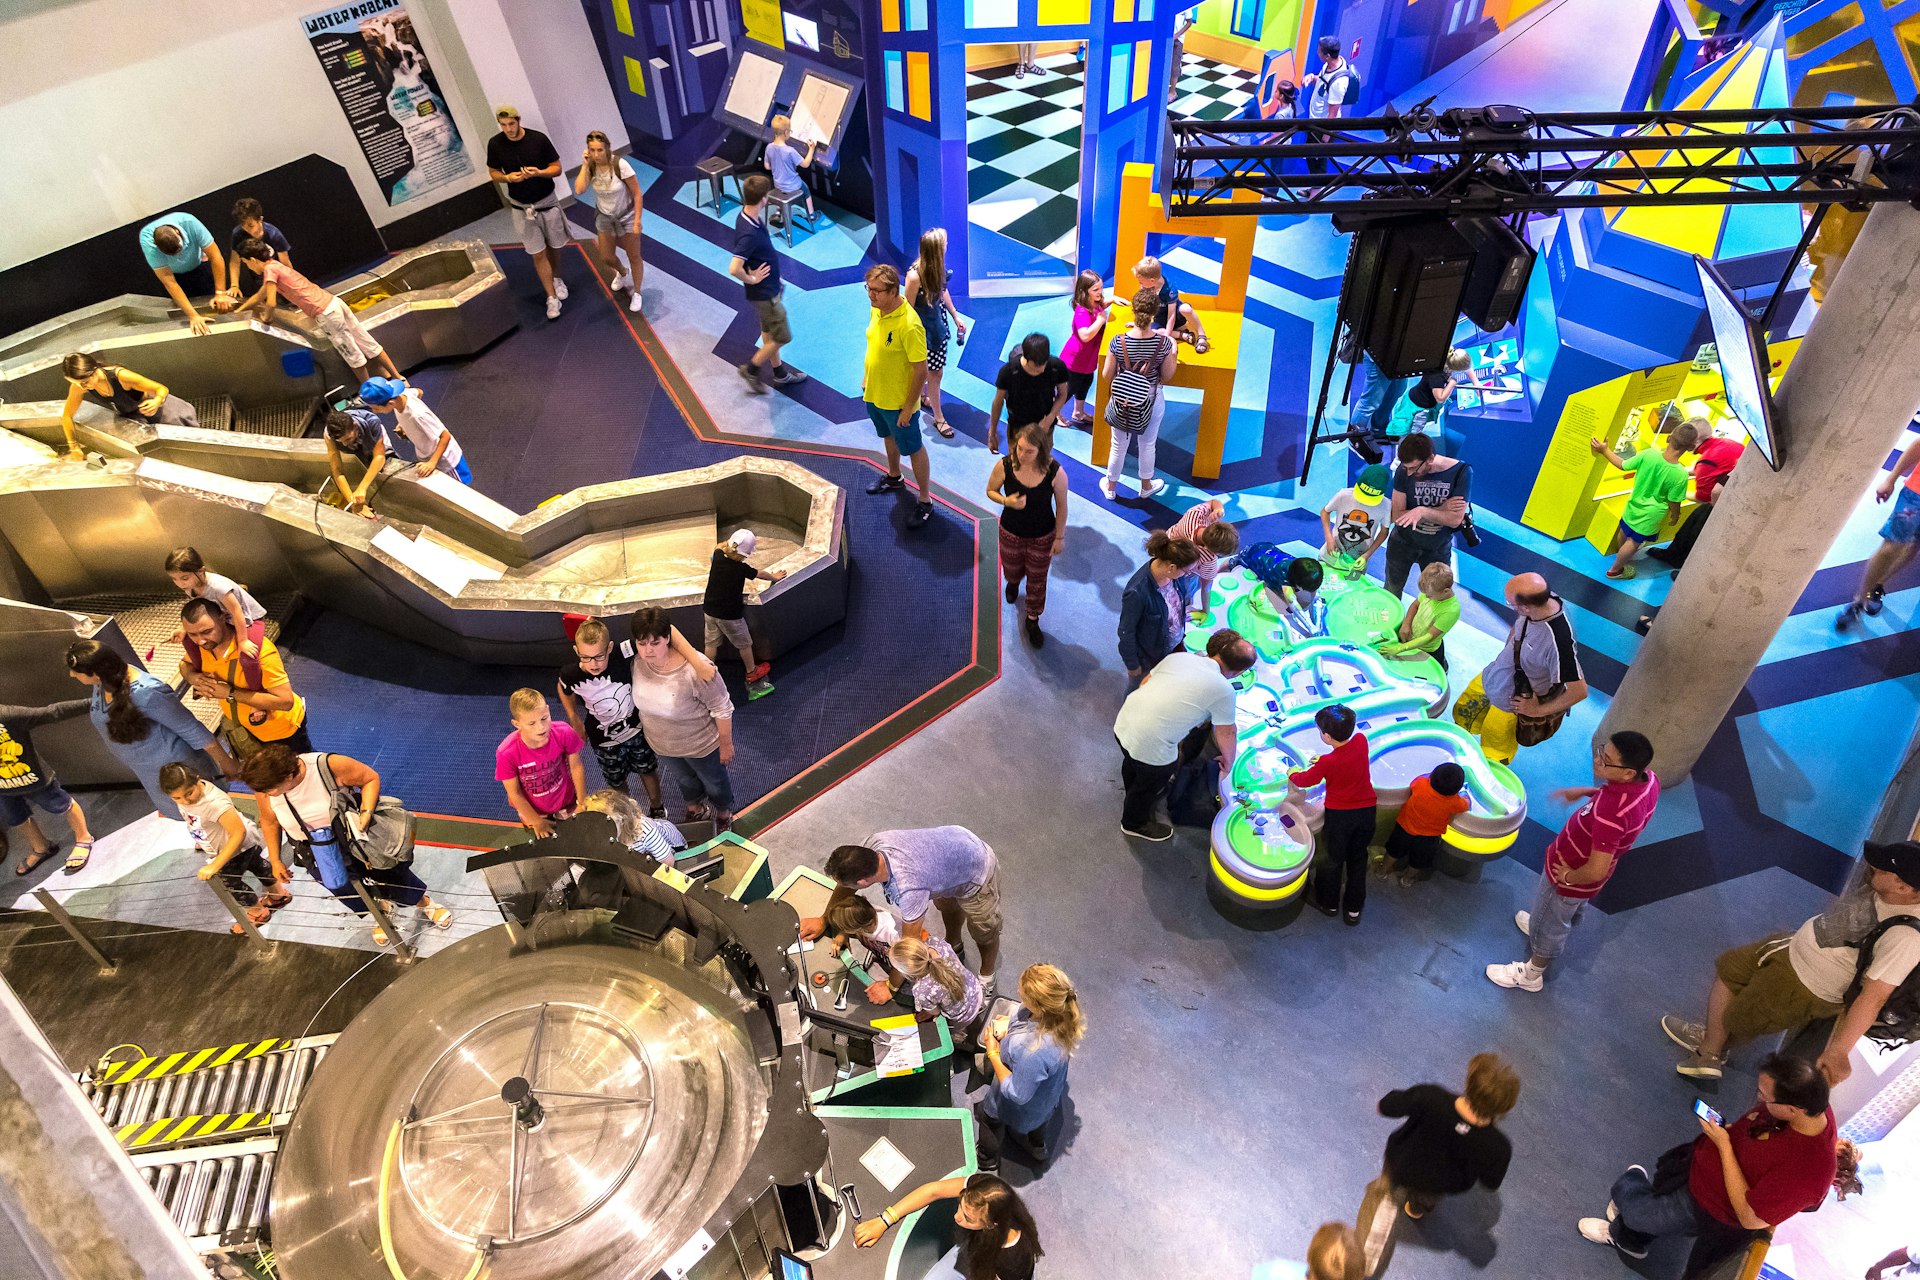 A hands-on gallery where children are playing with water and construction materials at Amsterdam's Nemo Science Musem